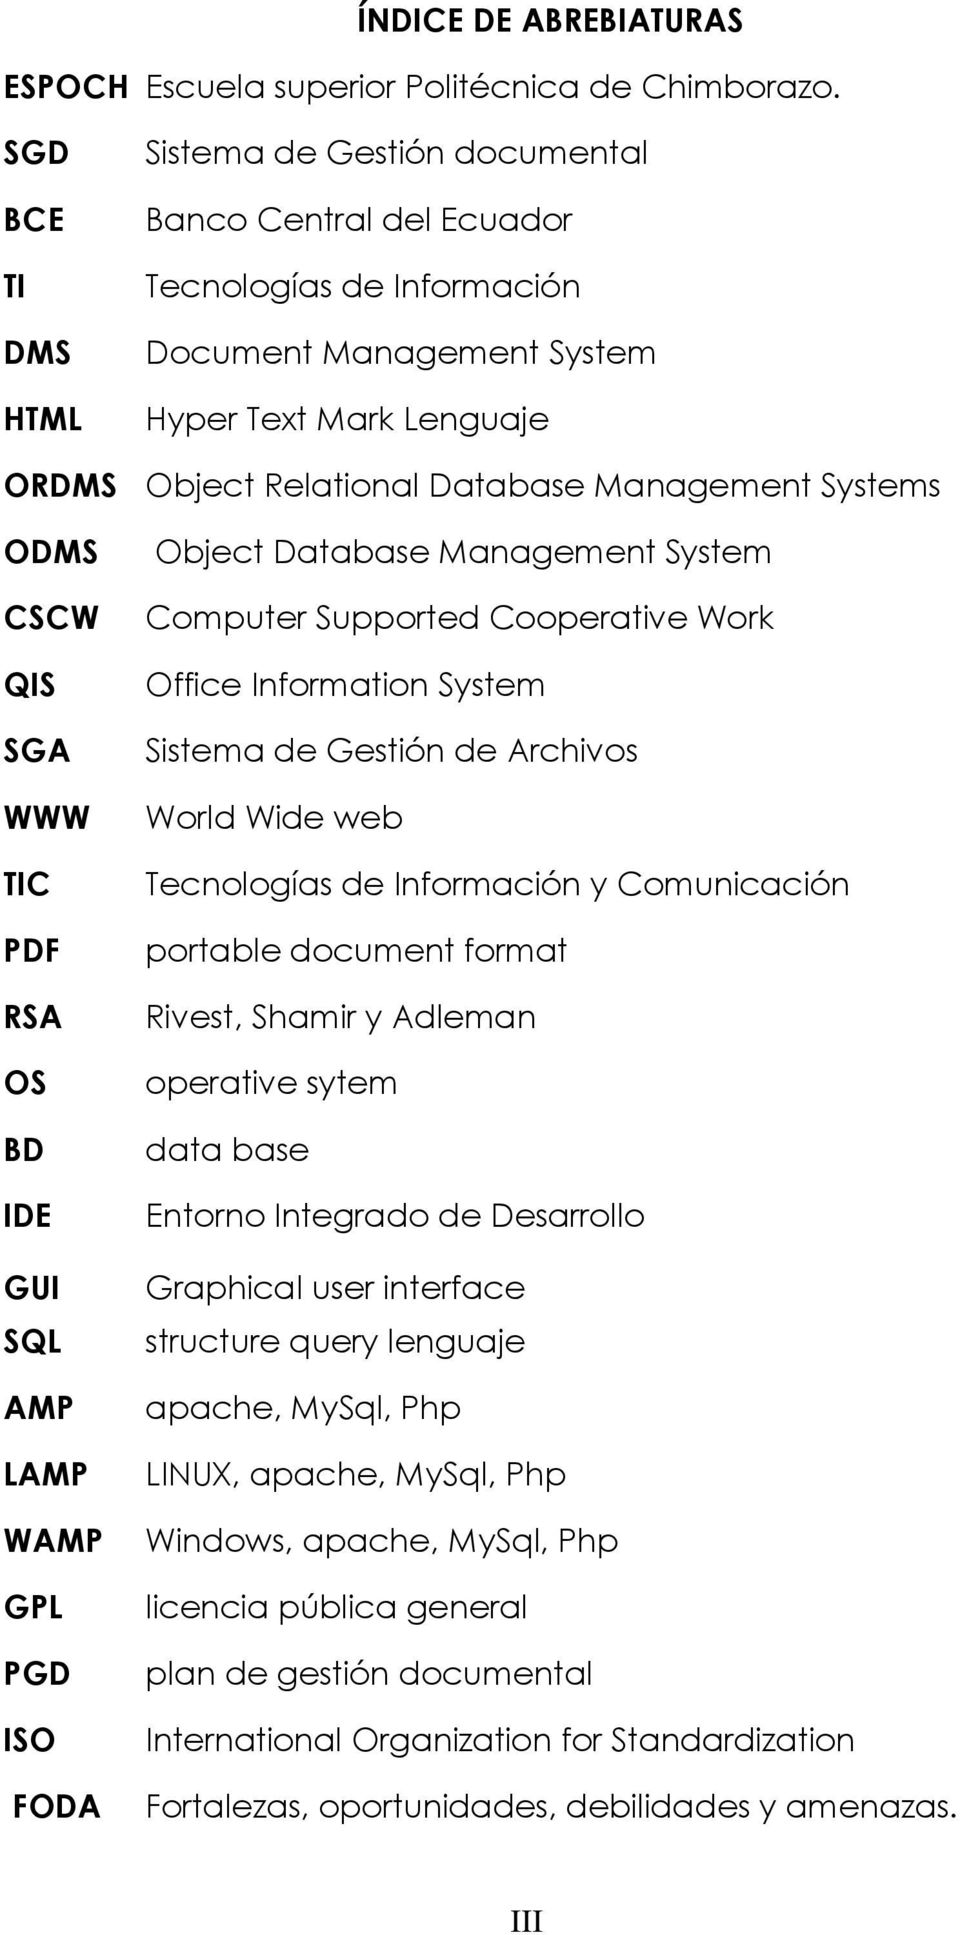 Systems ODMS CSCW QIS SGA WWW TIC PDF RSA OS BD IDE GUI SQL AMP LAMP WAMP GPL PGD ISO FODA Object Database Management System Computer Supported Cooperative Work Office Information System Sistema de